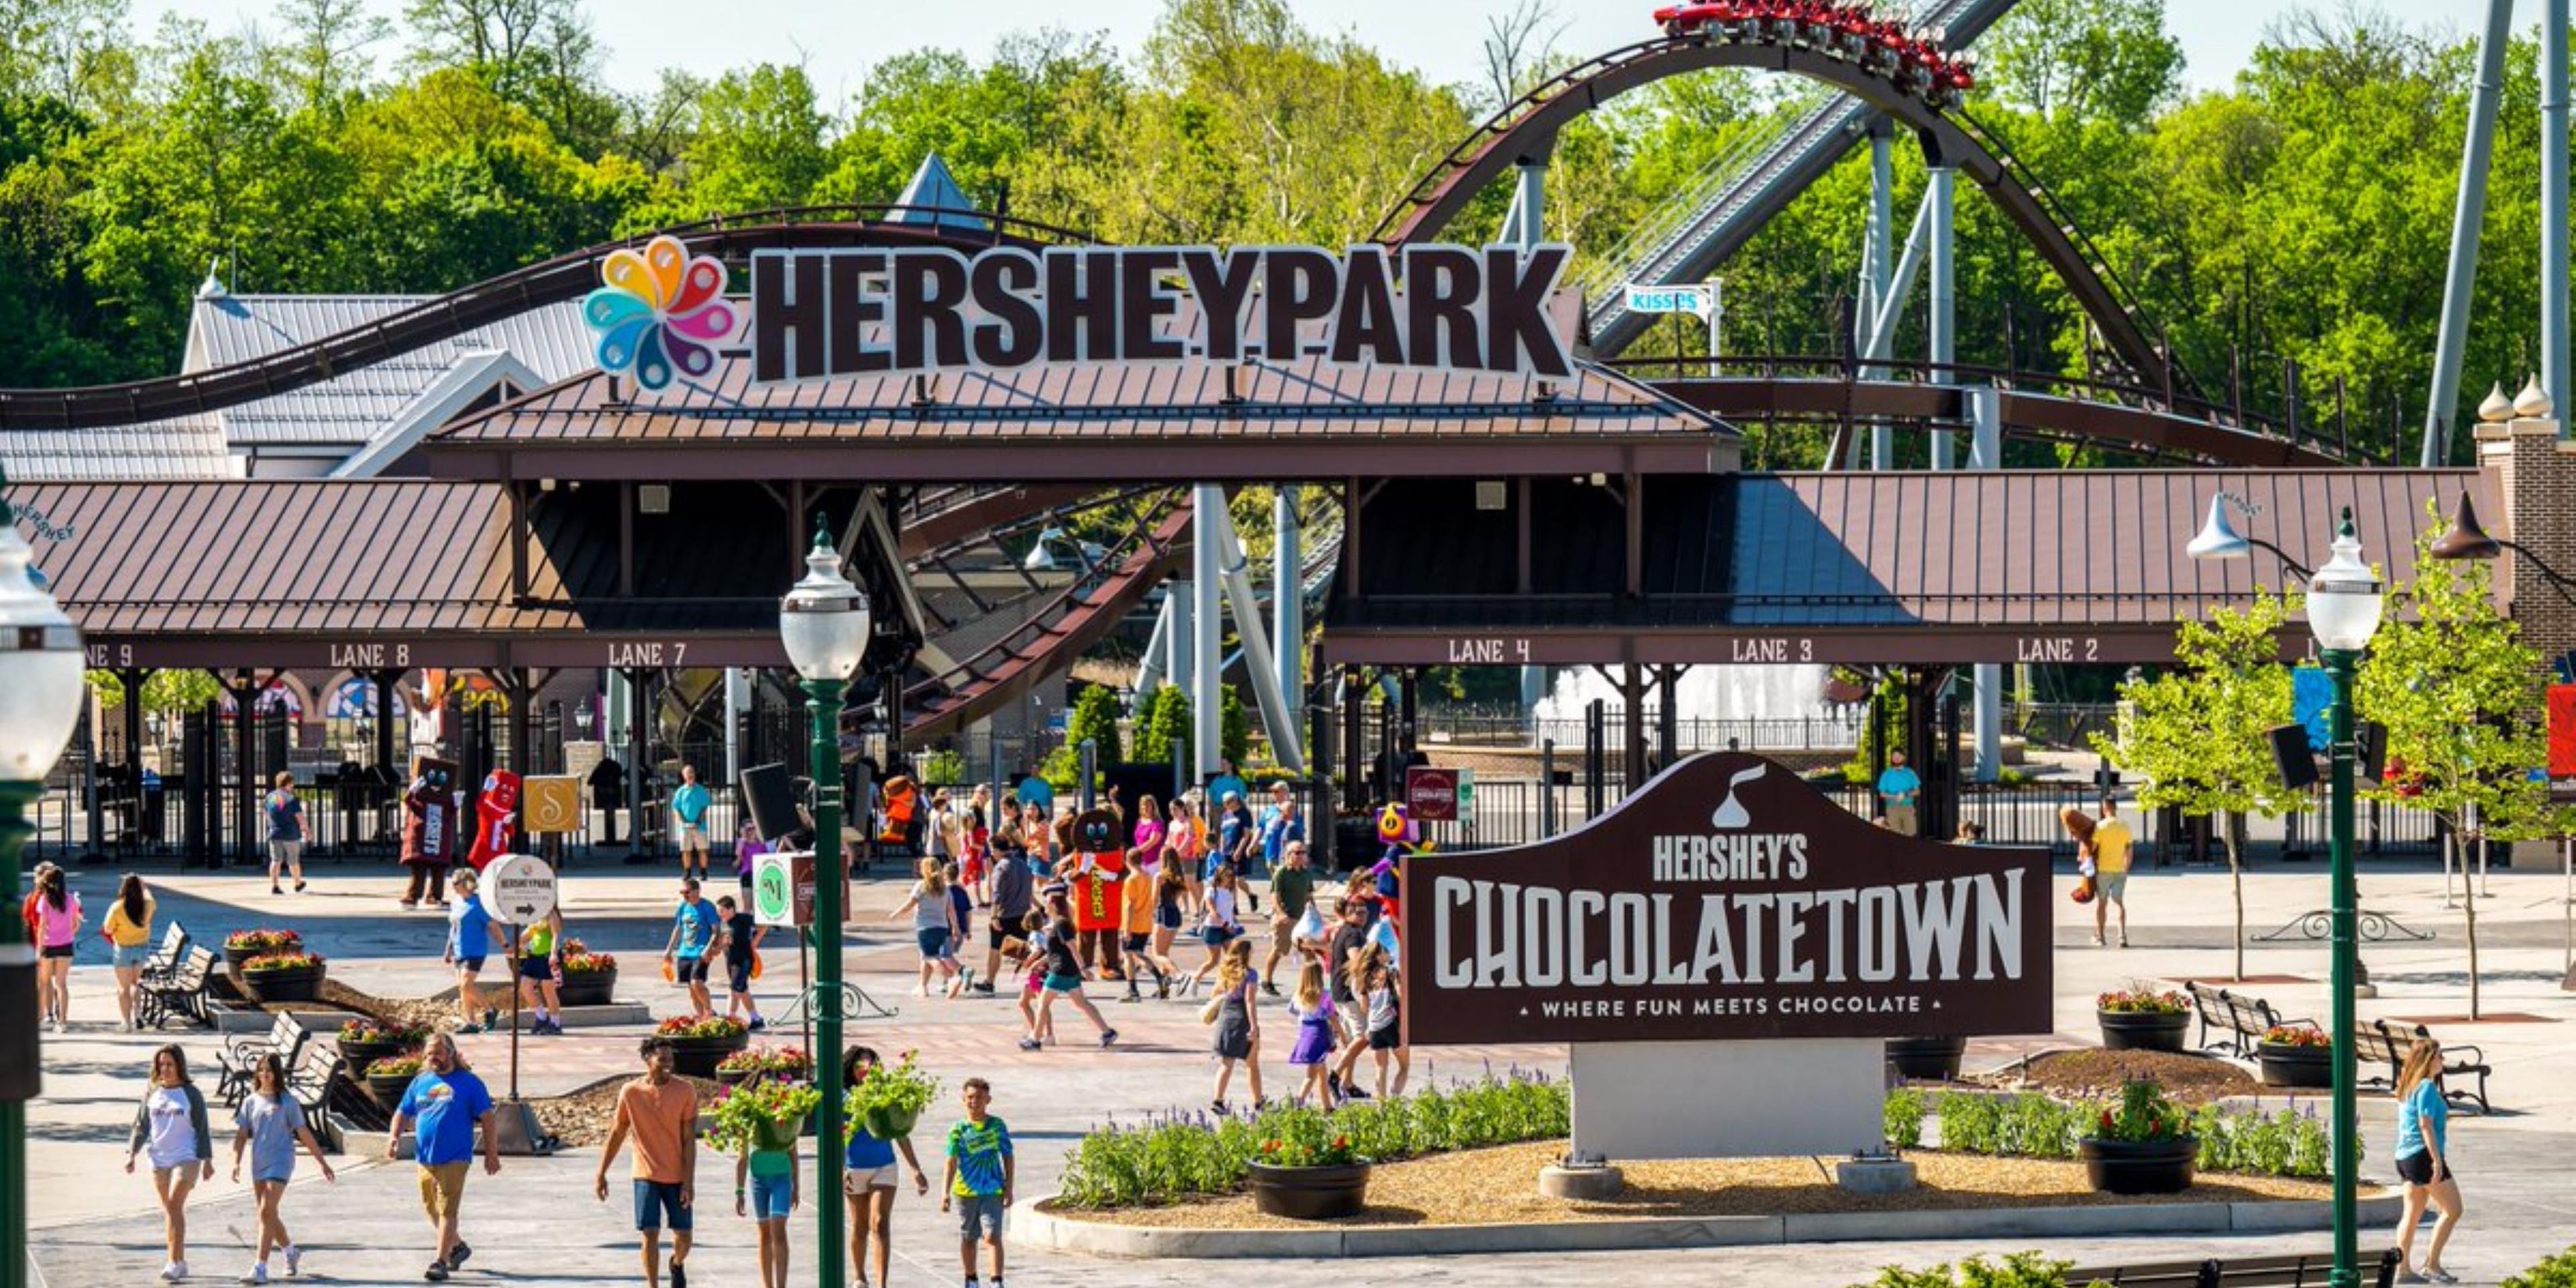 Hershey Park was originally created by Milton S. Hershey as leisure grounds for employees of Hershey's Chocolate Factory. Today, this family theme park welcomes guests from around the world to experience Hershey. Ask our front desk team to help you plan your visit while your here! 